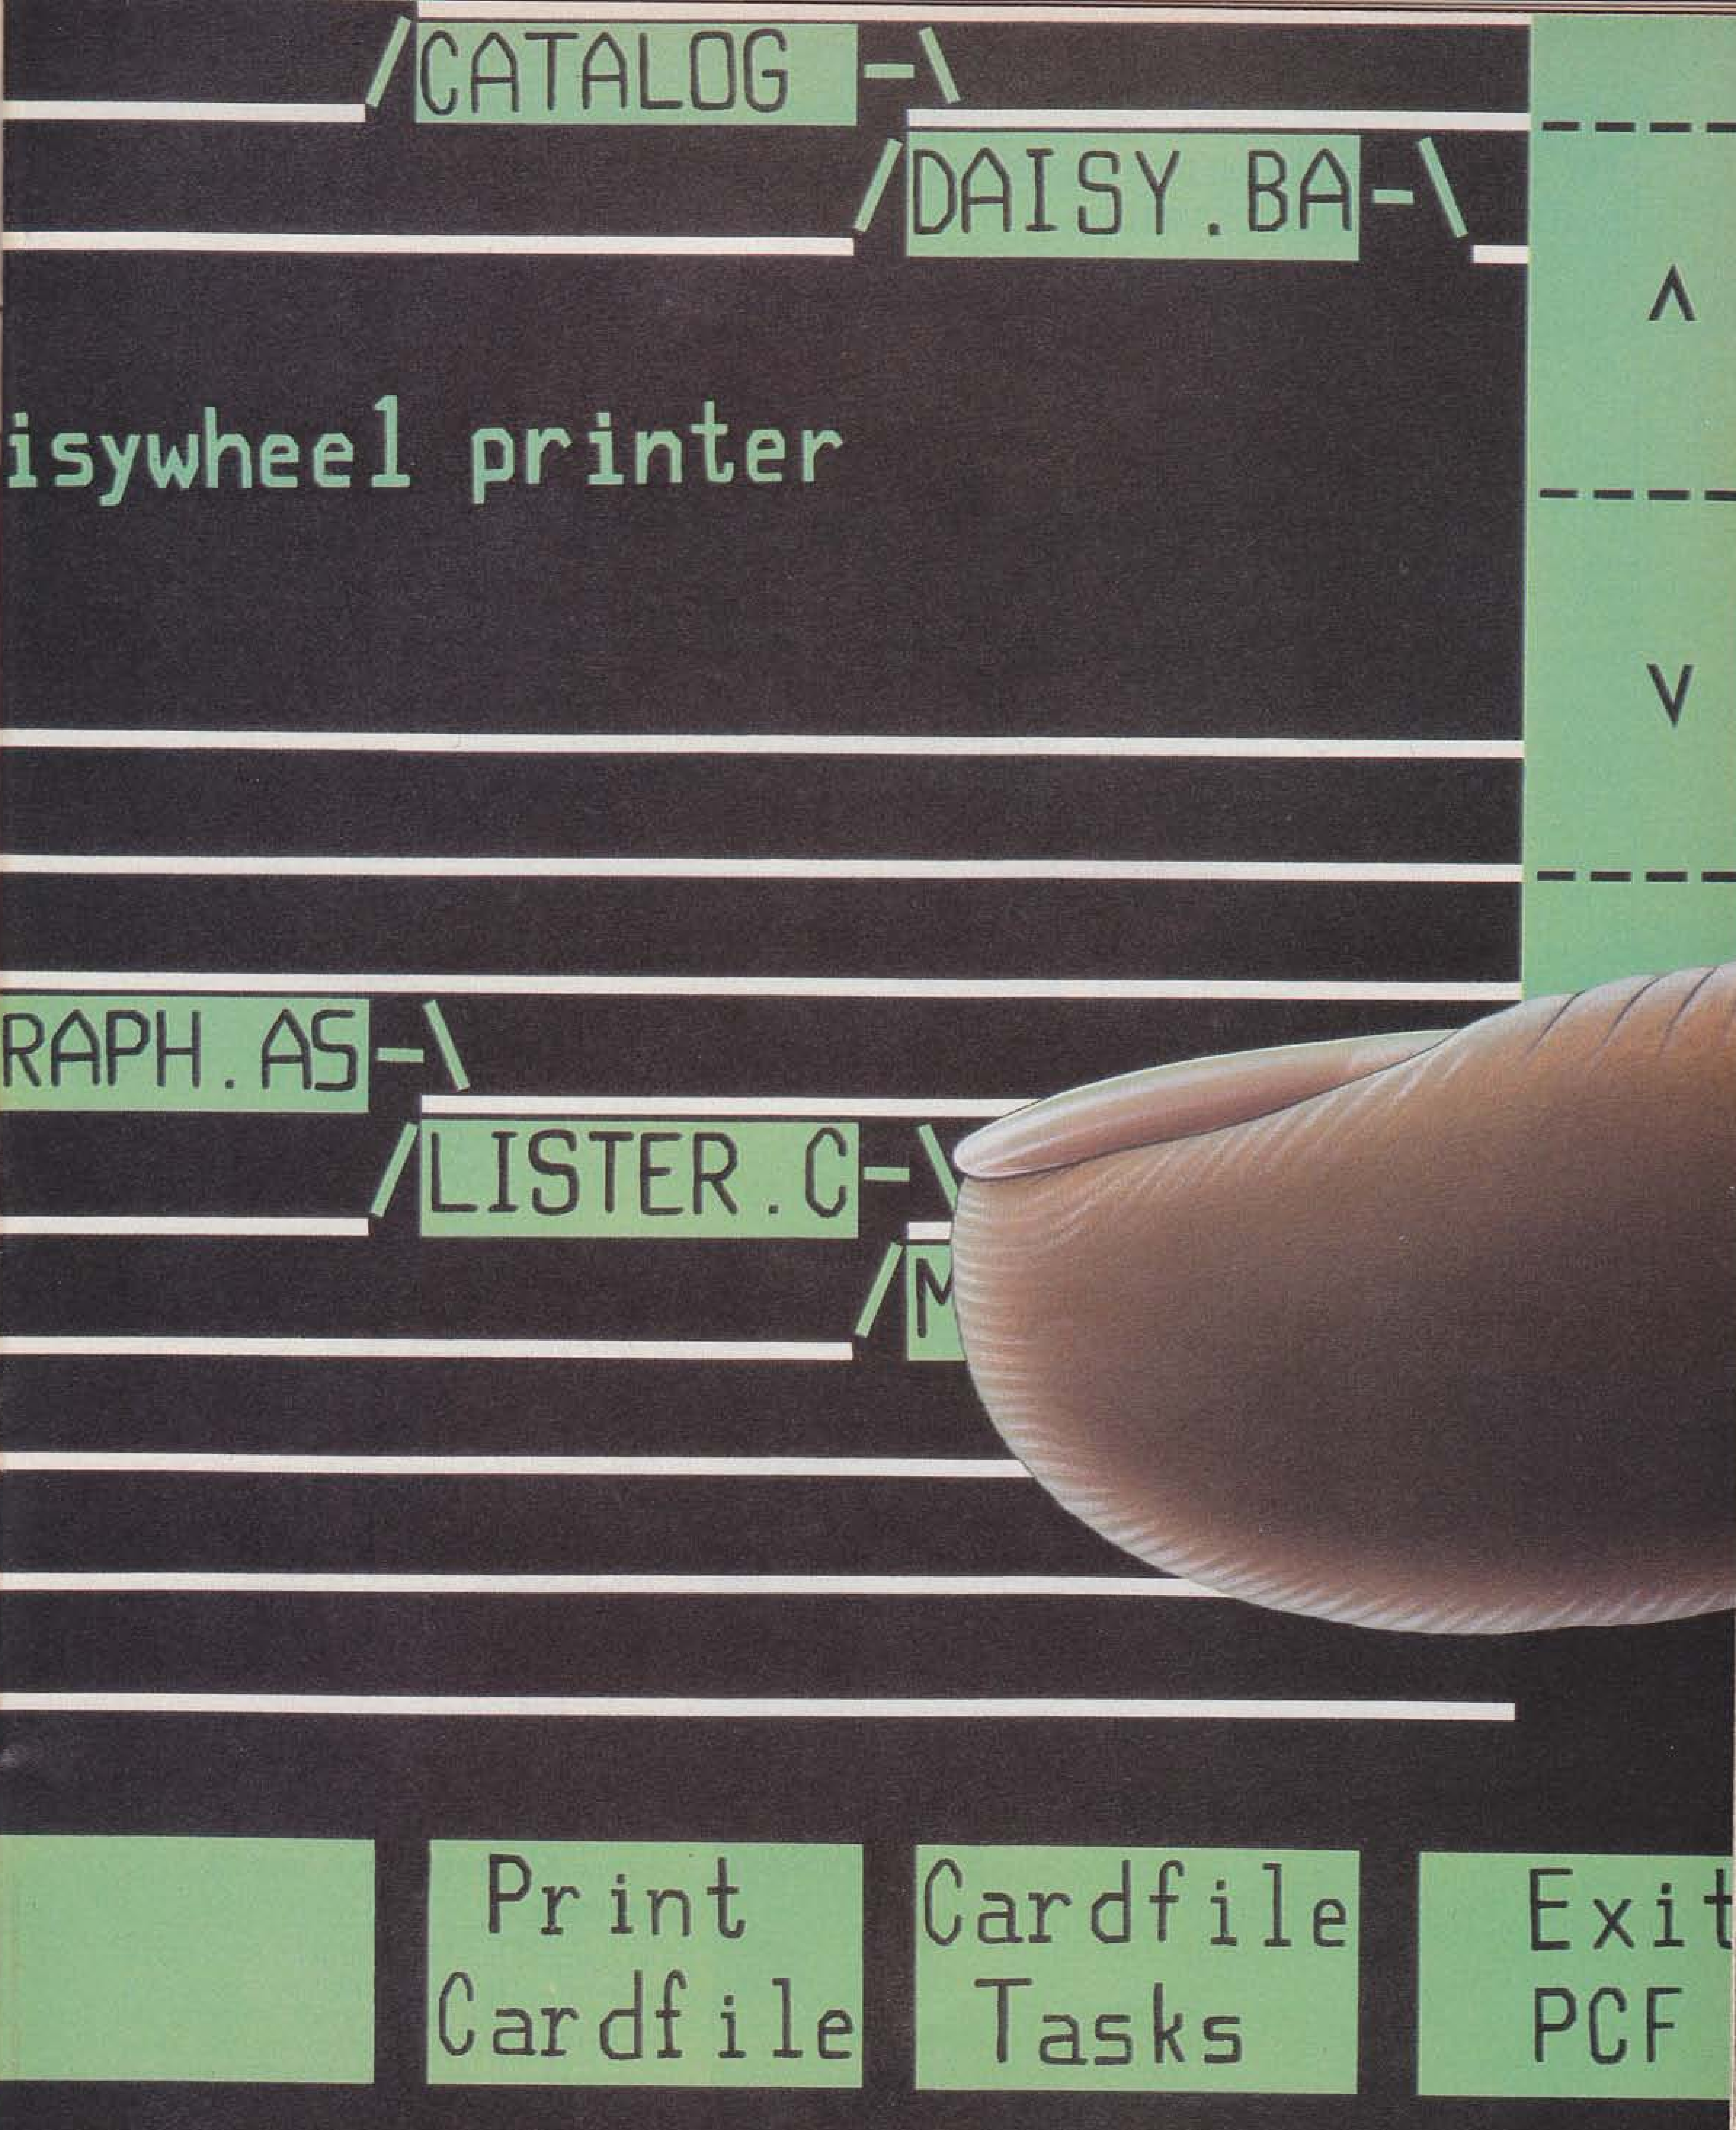 Tommy Soloski: Illustration from the article “Putting a Finger On the Hp150” in _Professional computing_ (April 1984).